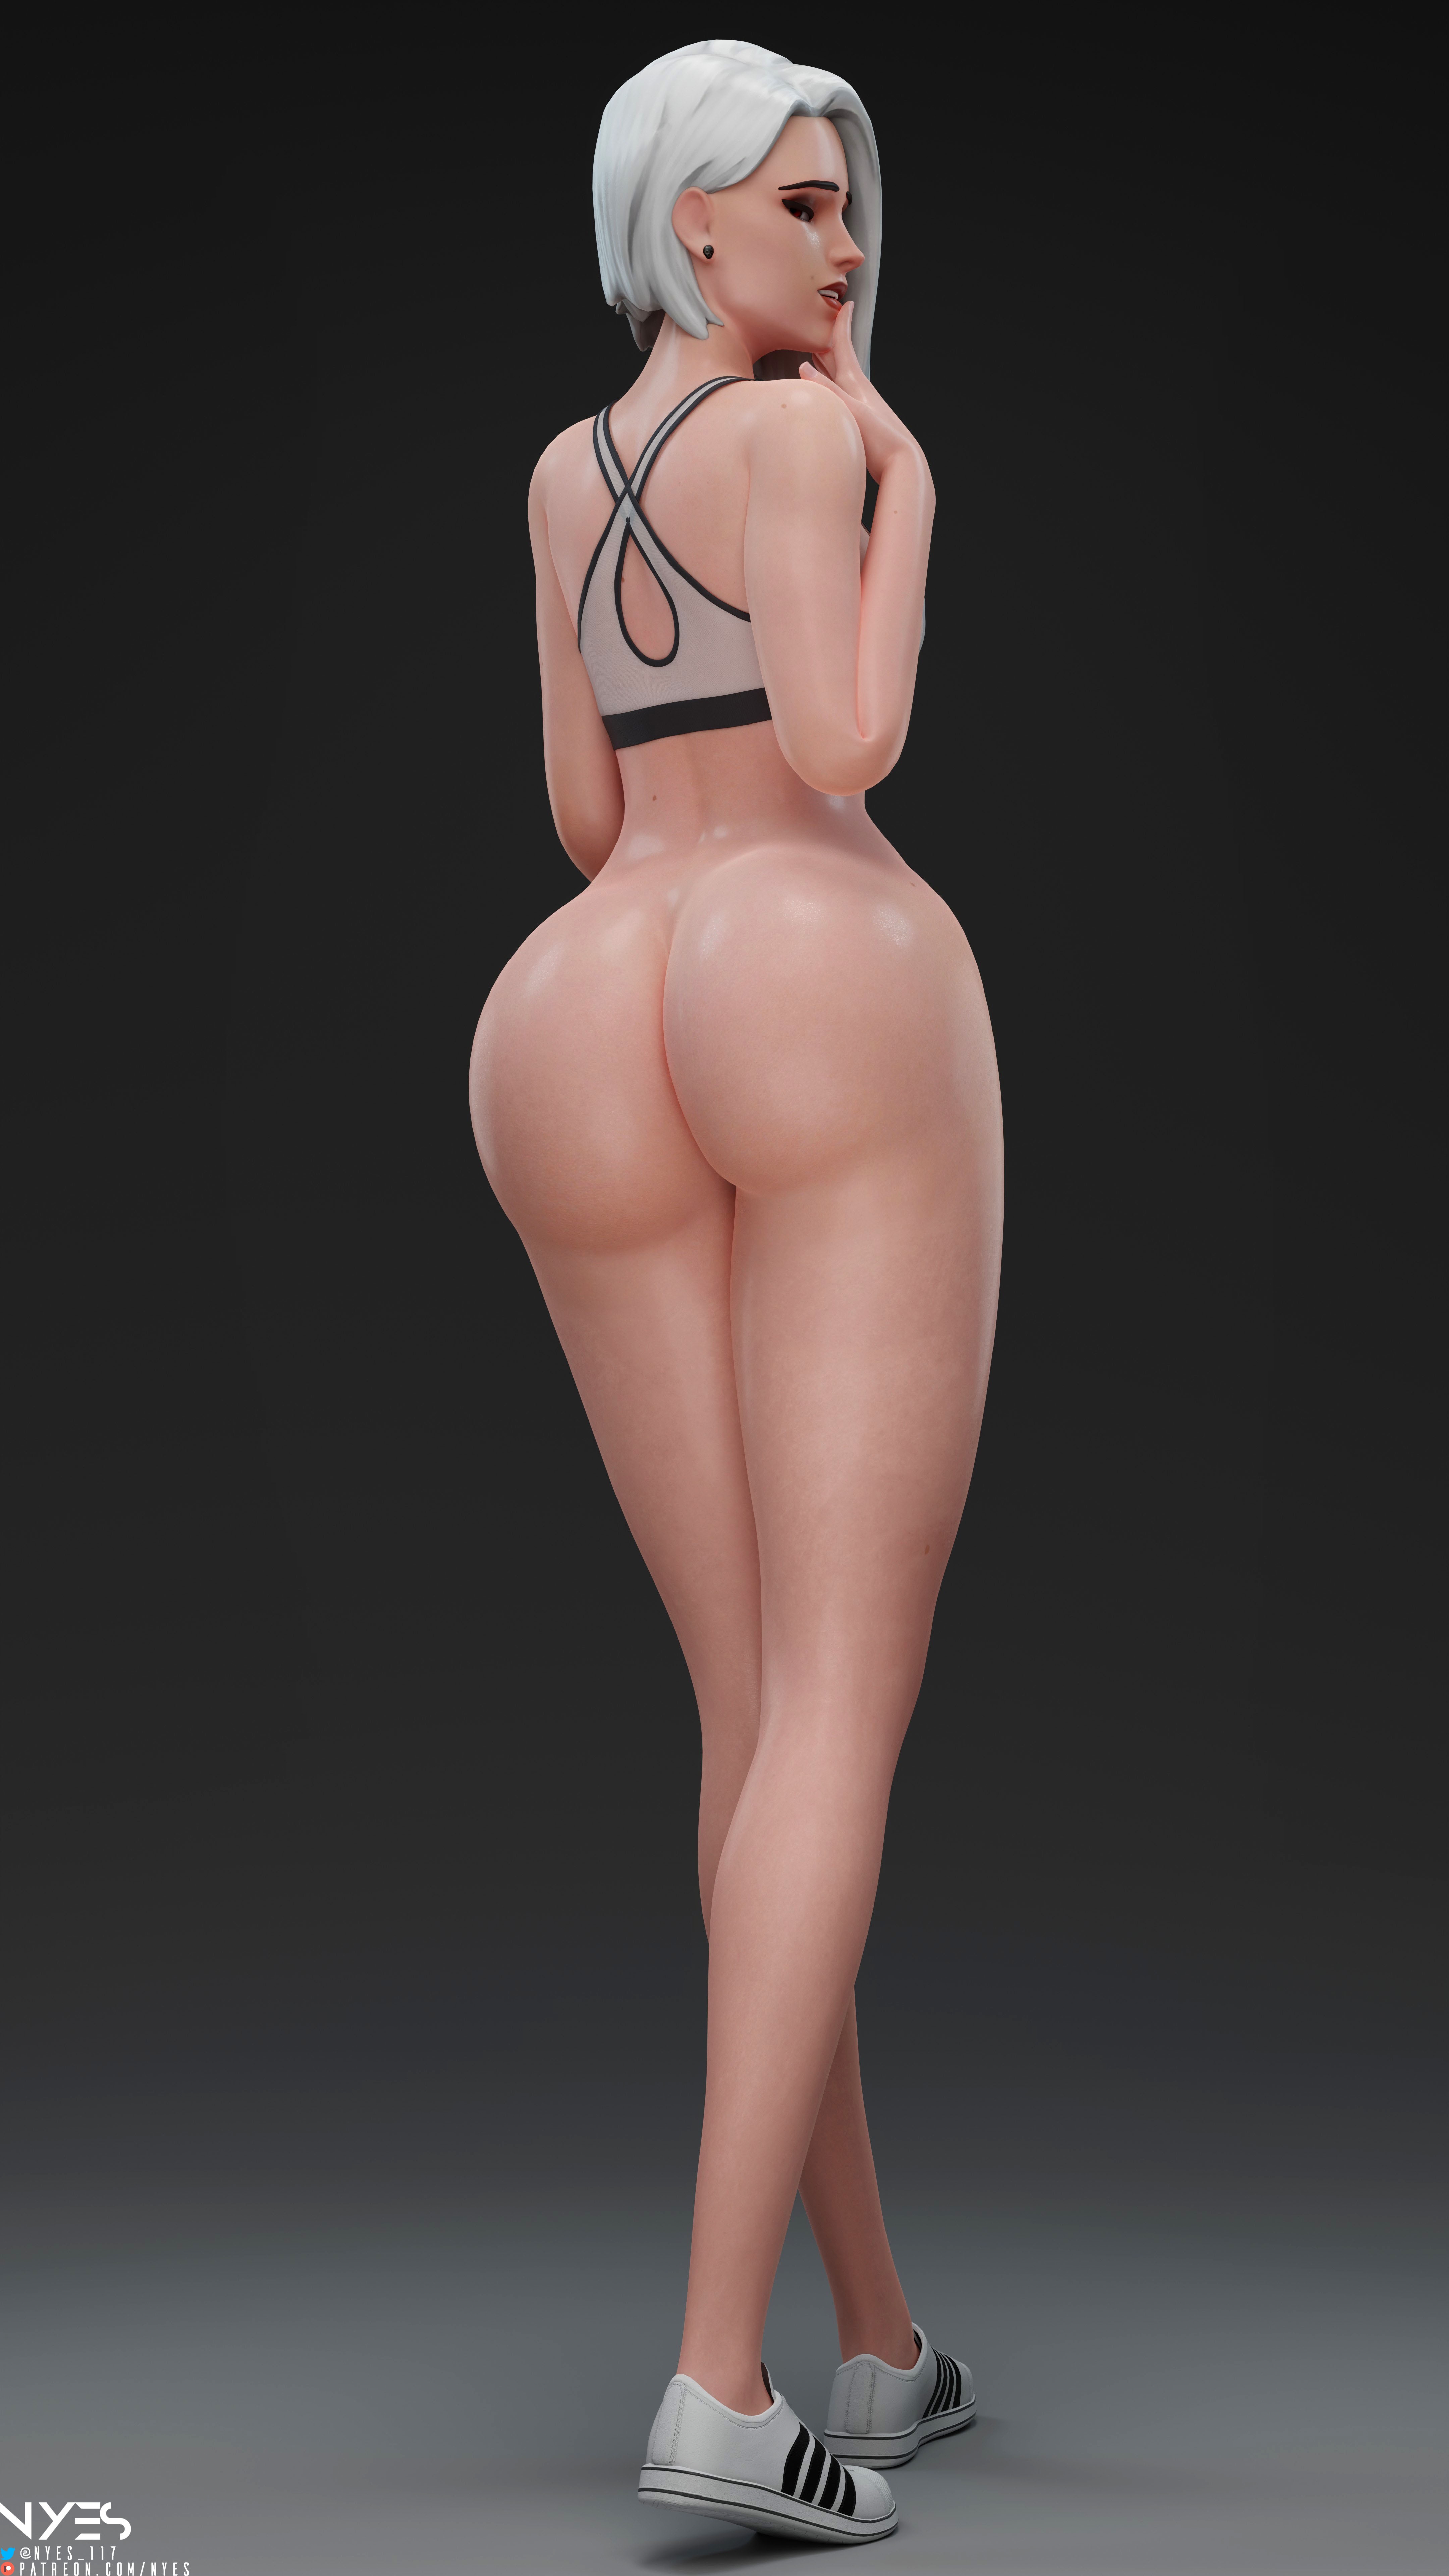 Ashe (8K) Ashe Overwatch Ashe (overwatch) Partially_clothed Big Ass Shoes Oiled Pinup